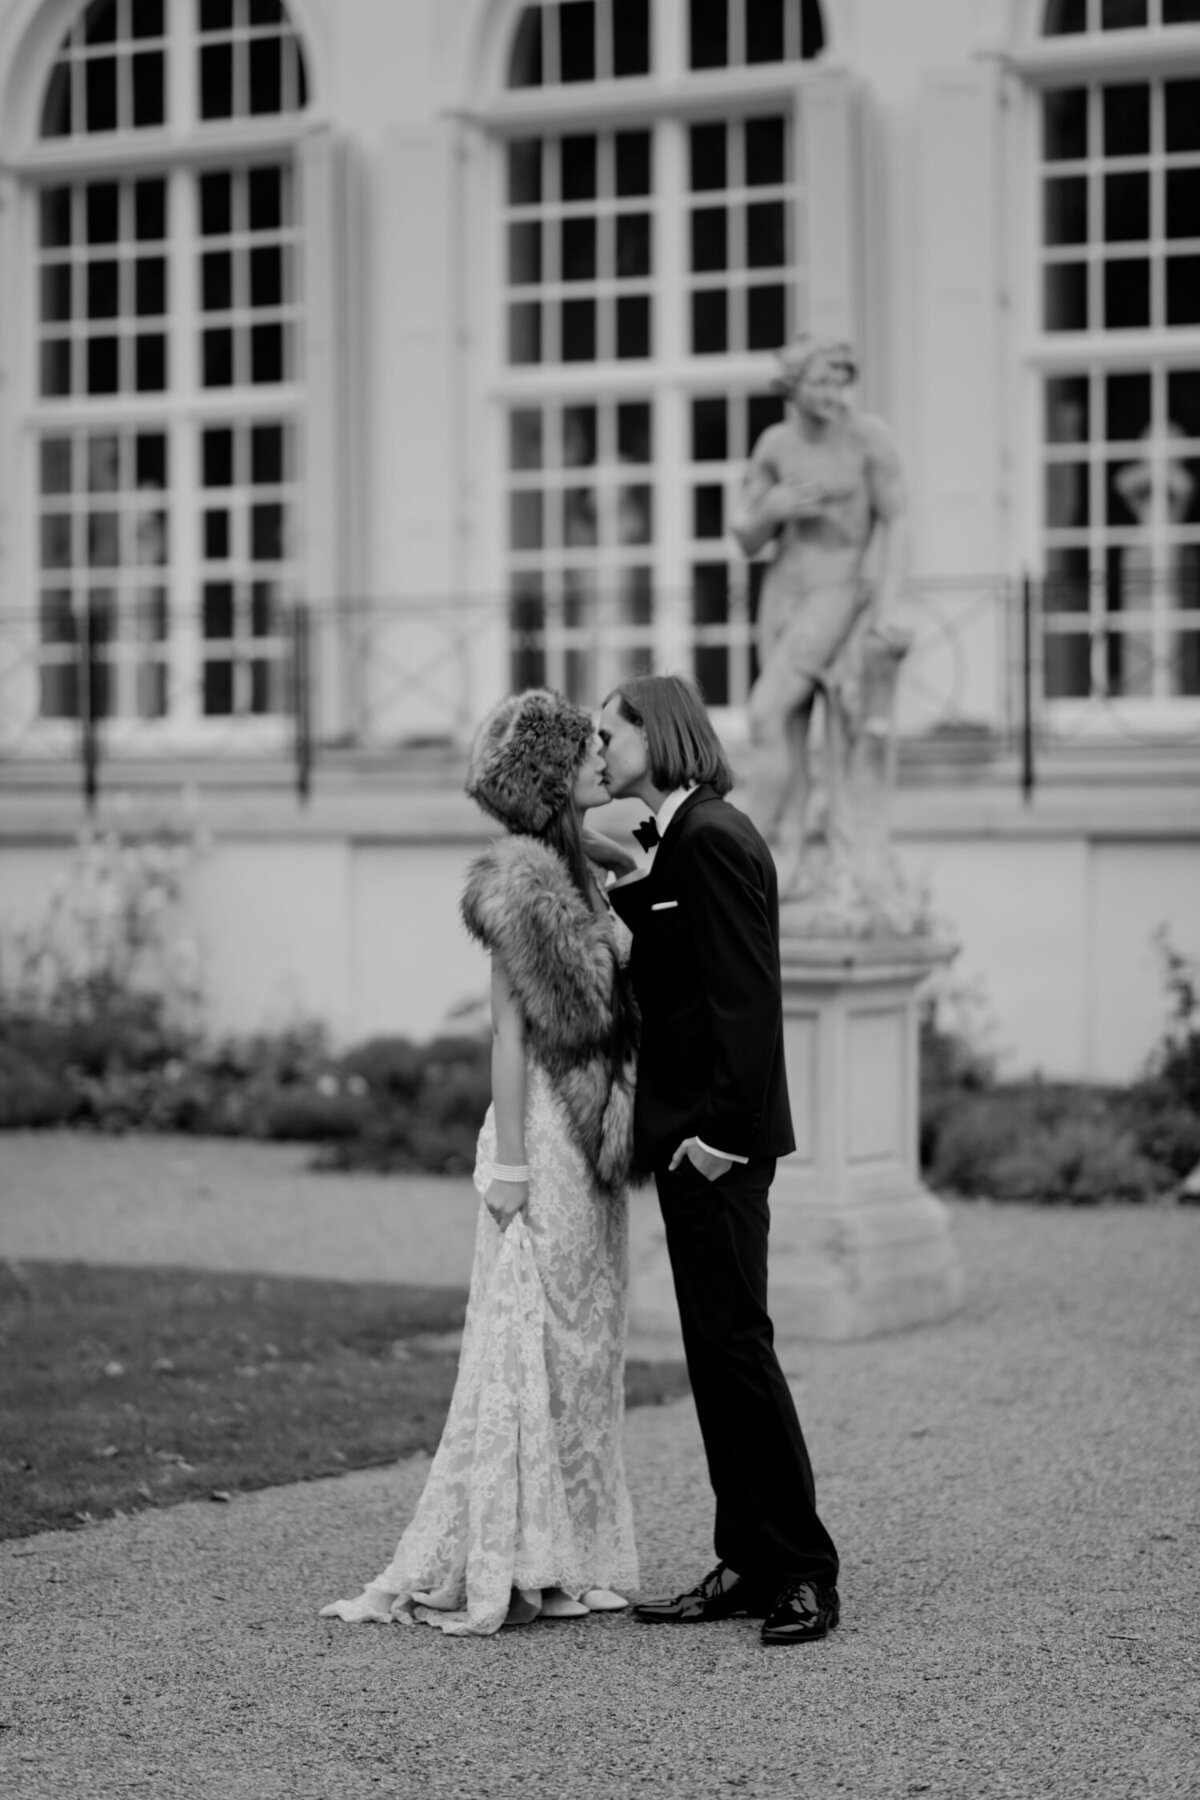 076_Flora_And_Grace_Europe_Fine_Art_Wedding_Photographer-256_A sophisticated fine art wedding in Europe with an editorial edge captured by Vogue wedding photographer Flora and Grace.